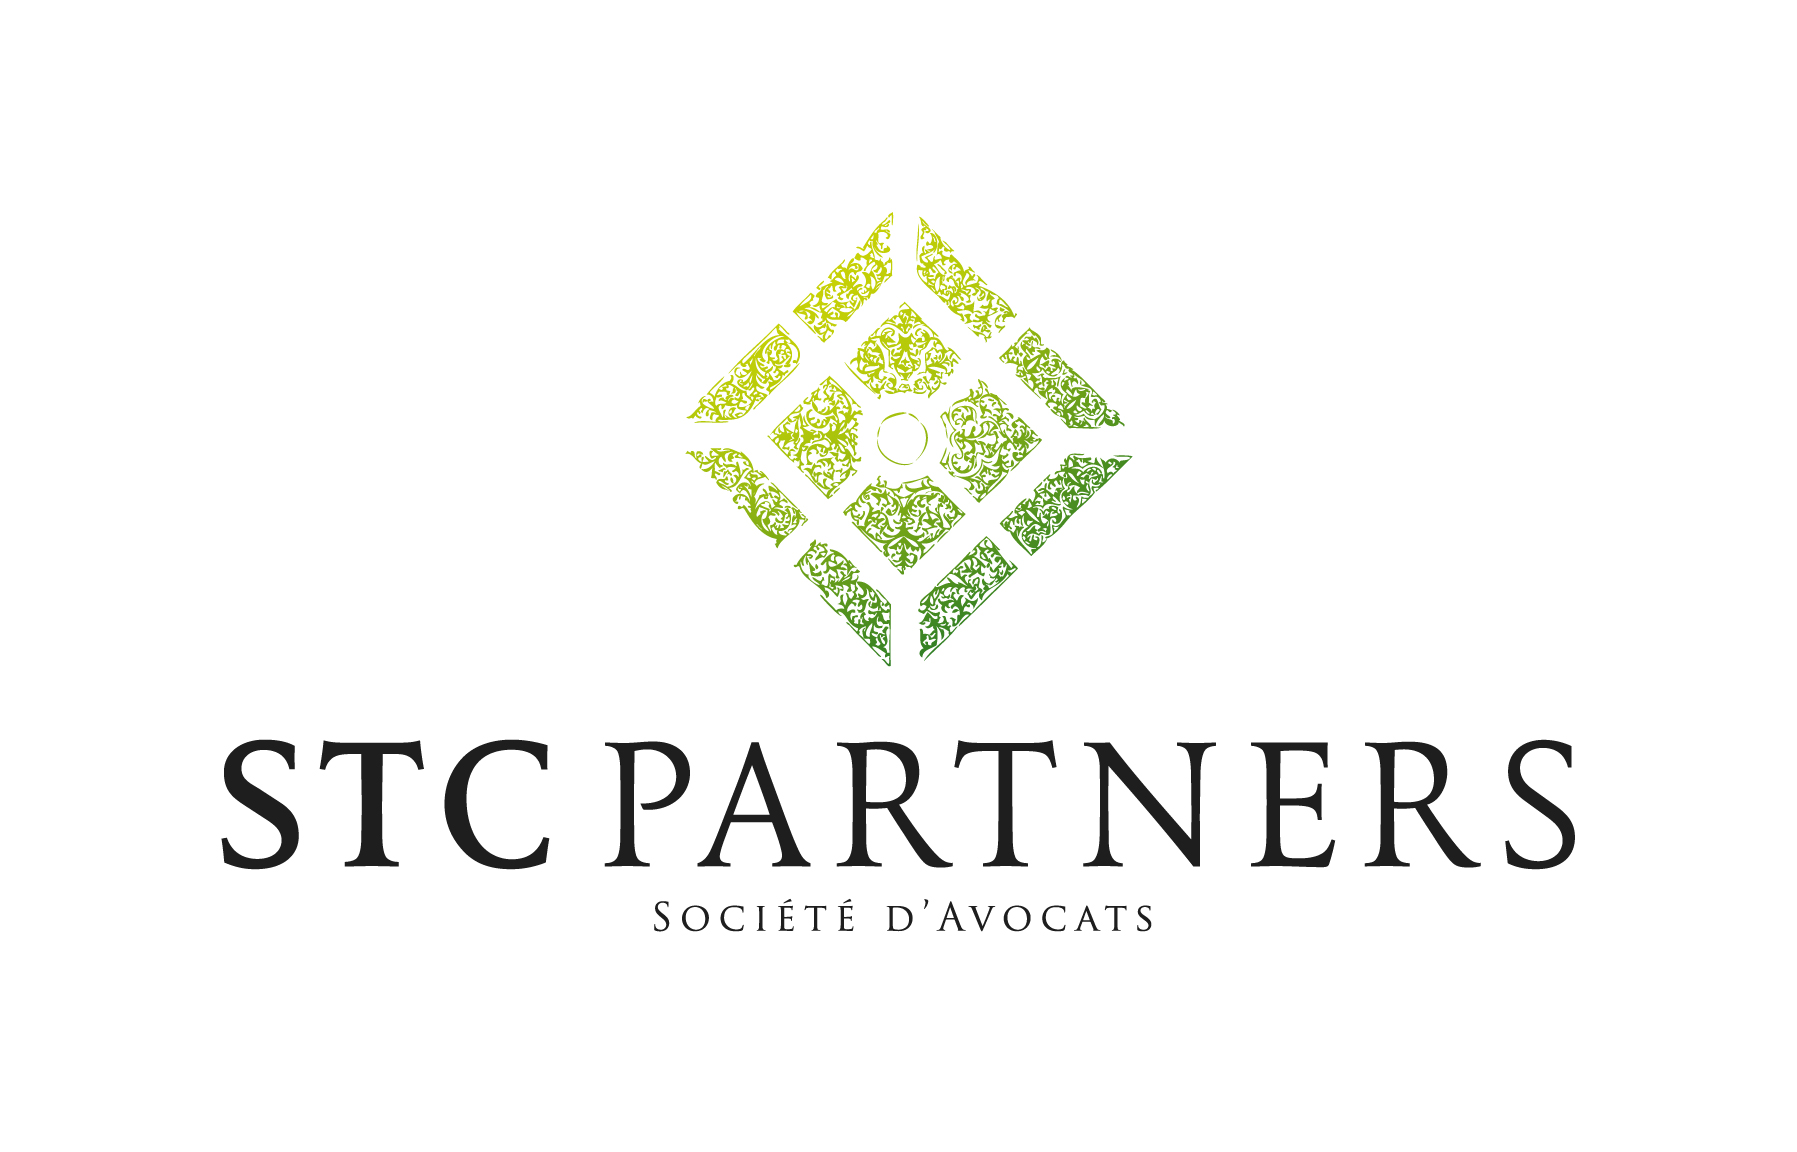 STCPARTNERS